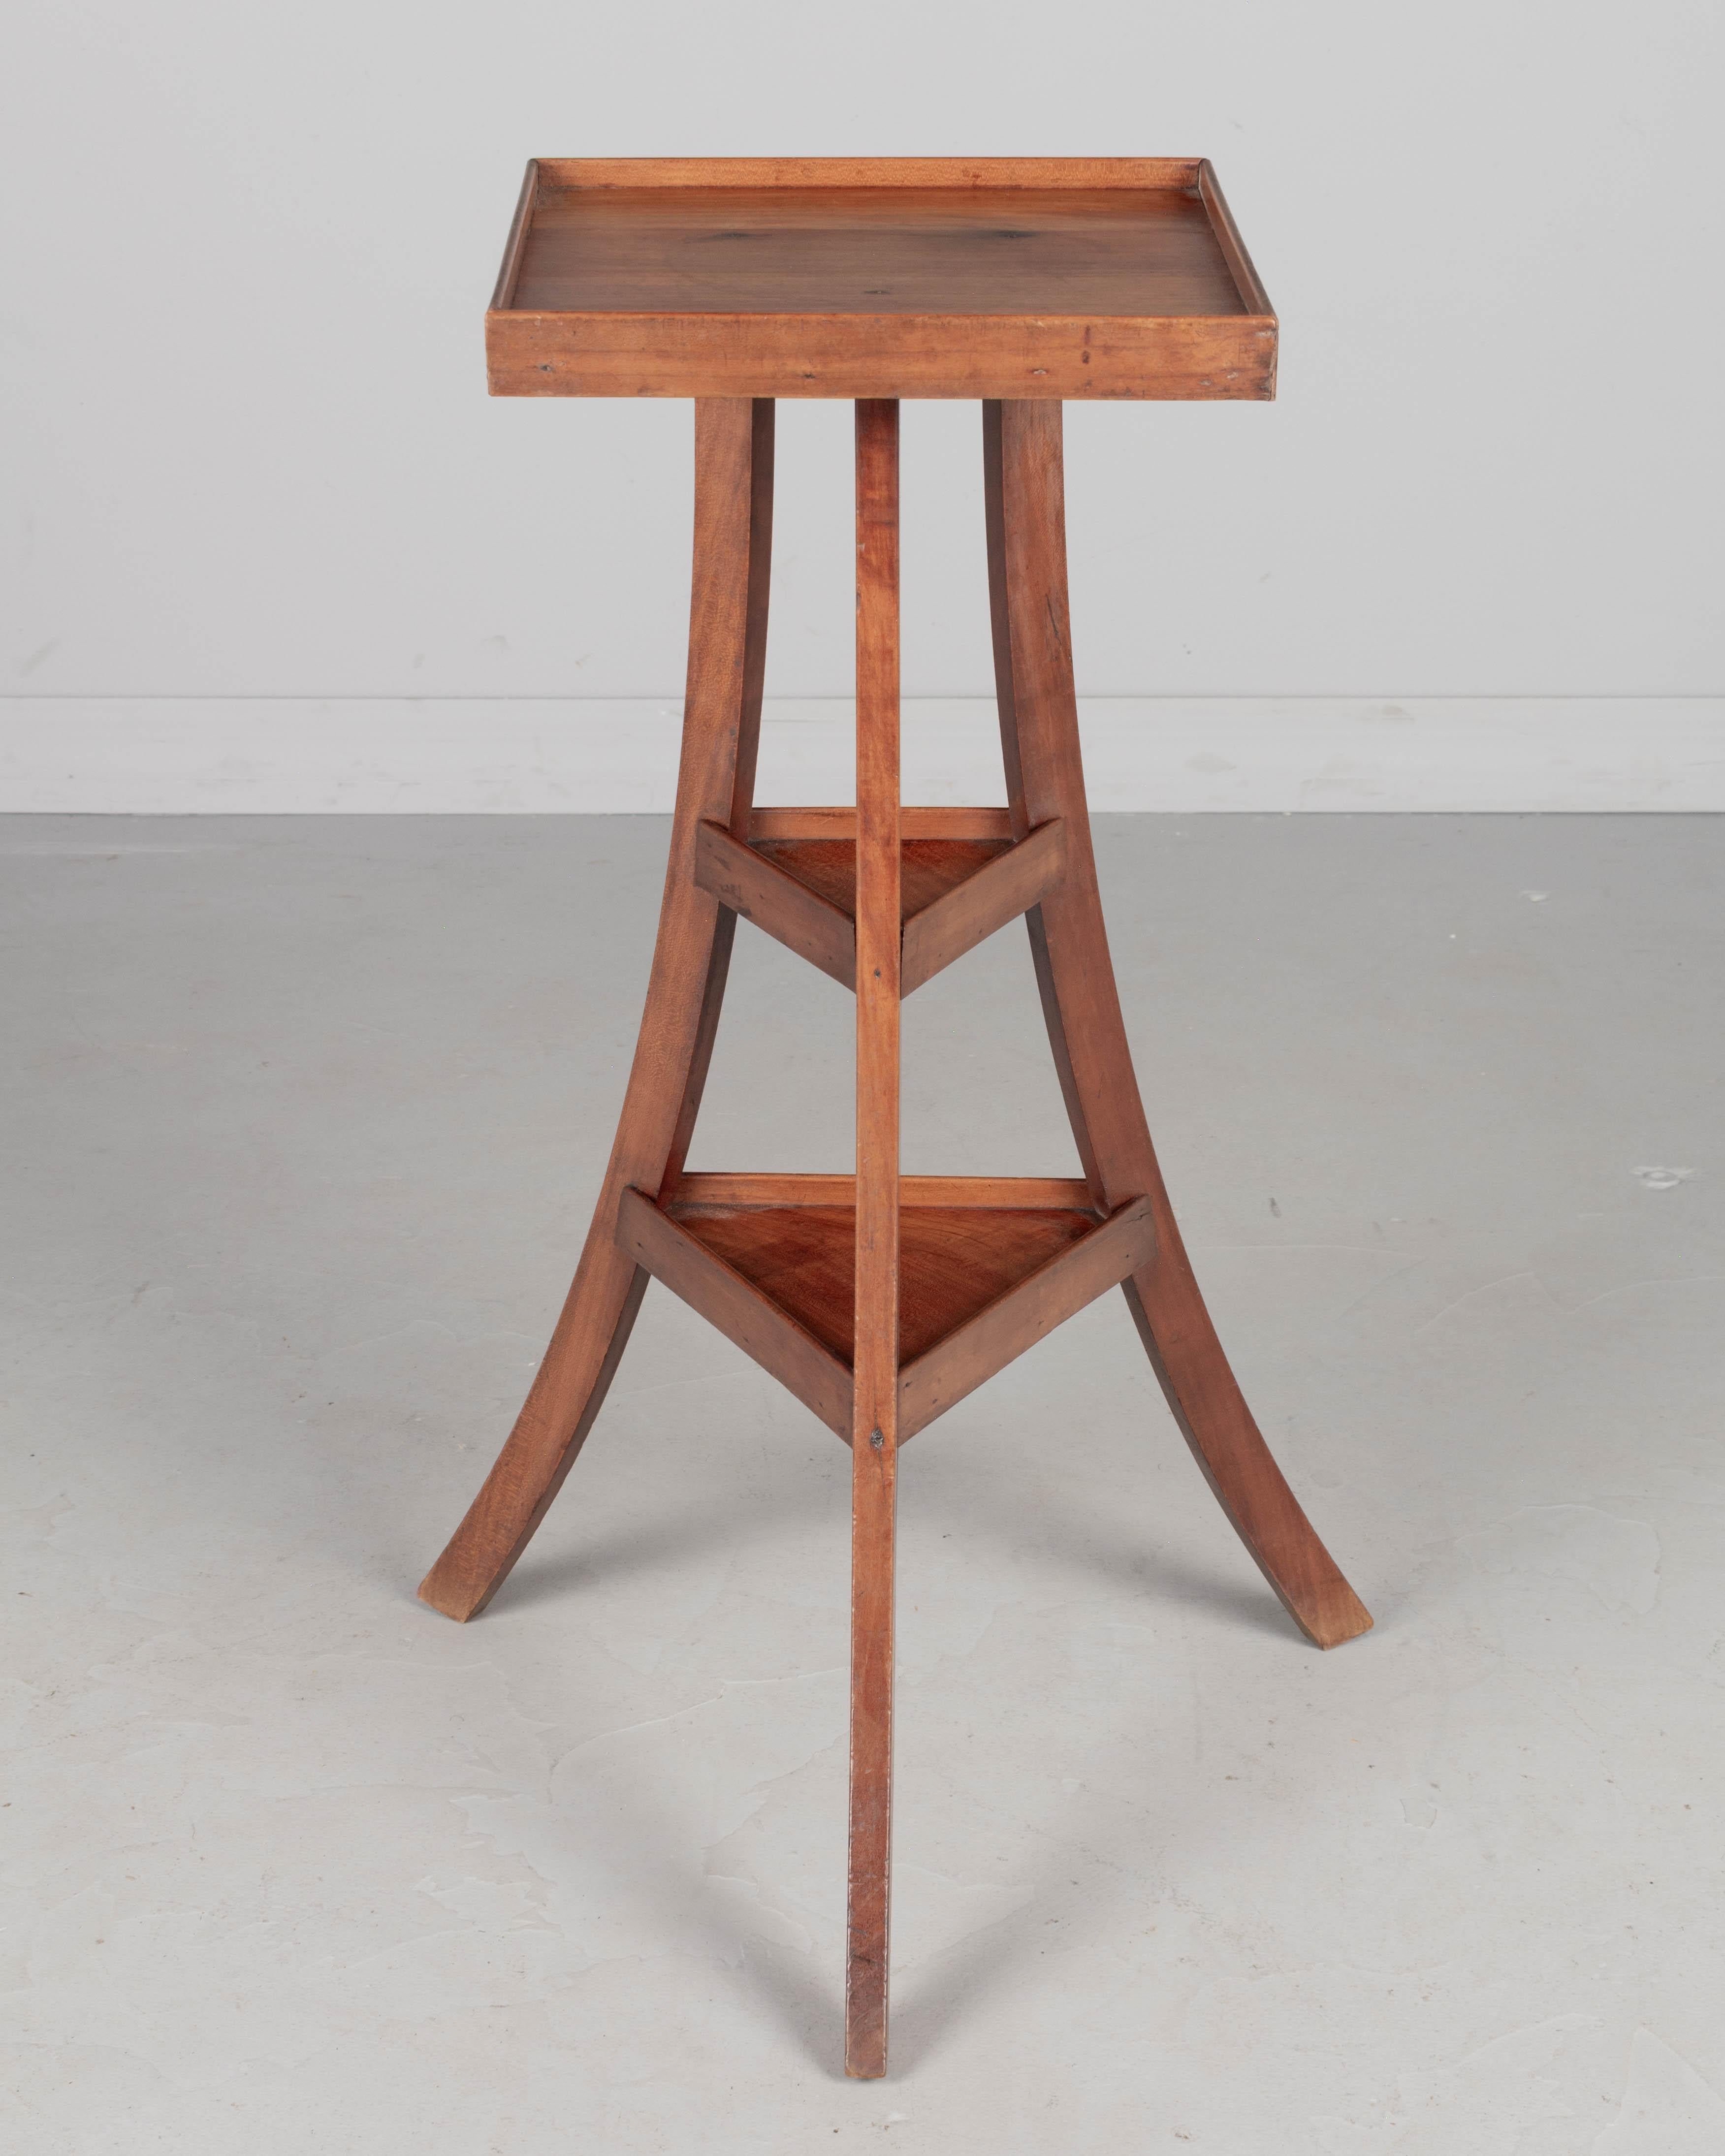 A French Arts & Crafts style small tripod accent table or pedestal, hand-crafted of solid cherry wood. Interesting form with square top and curved legs joined by triangle shelves. Circa 1940s
Dimensions: 17.5